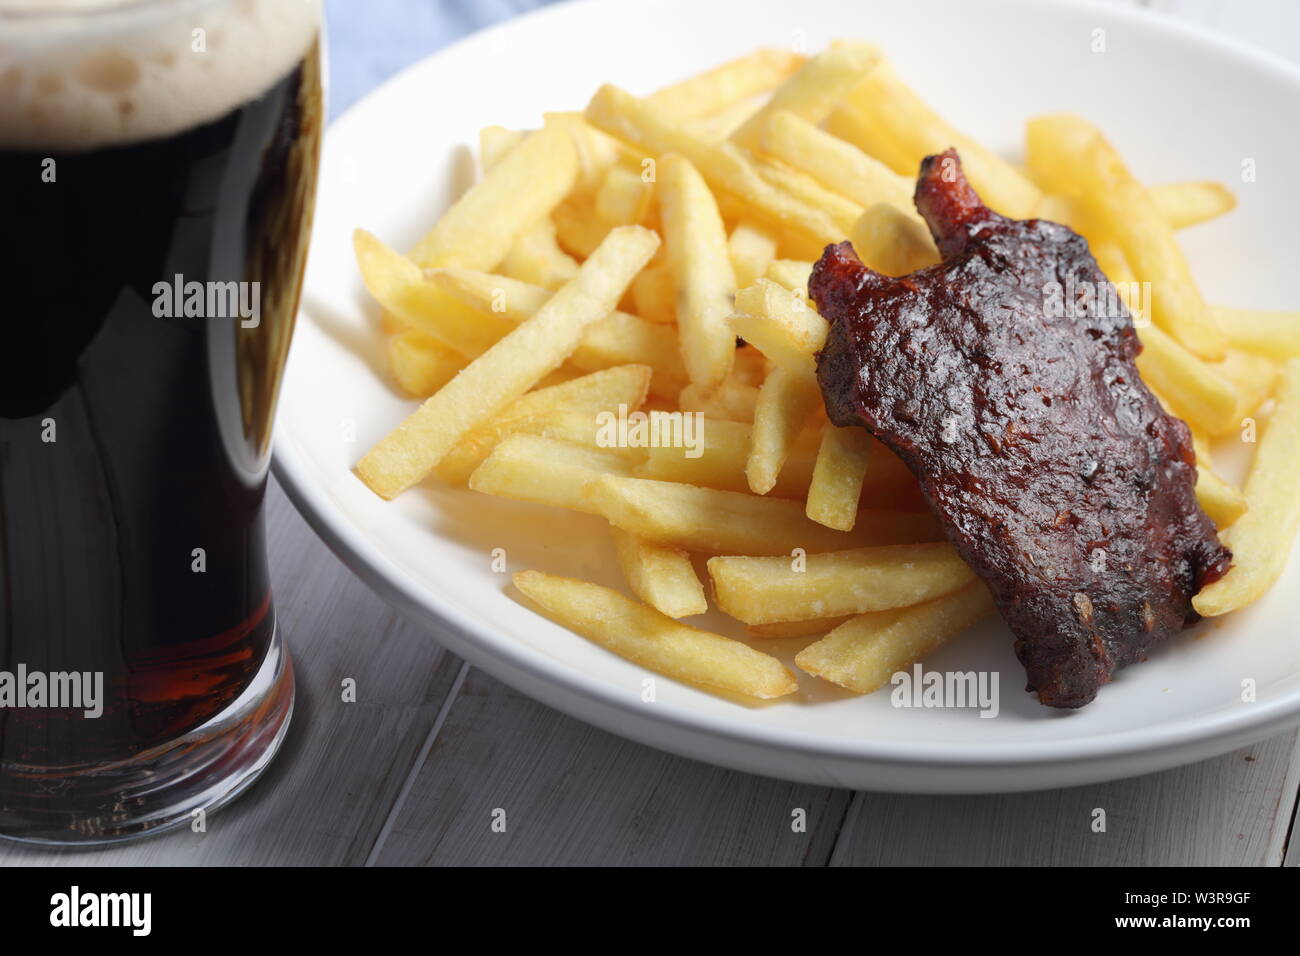 Grilled pork ribs with French fries and a glass of dark beer Stock Photo